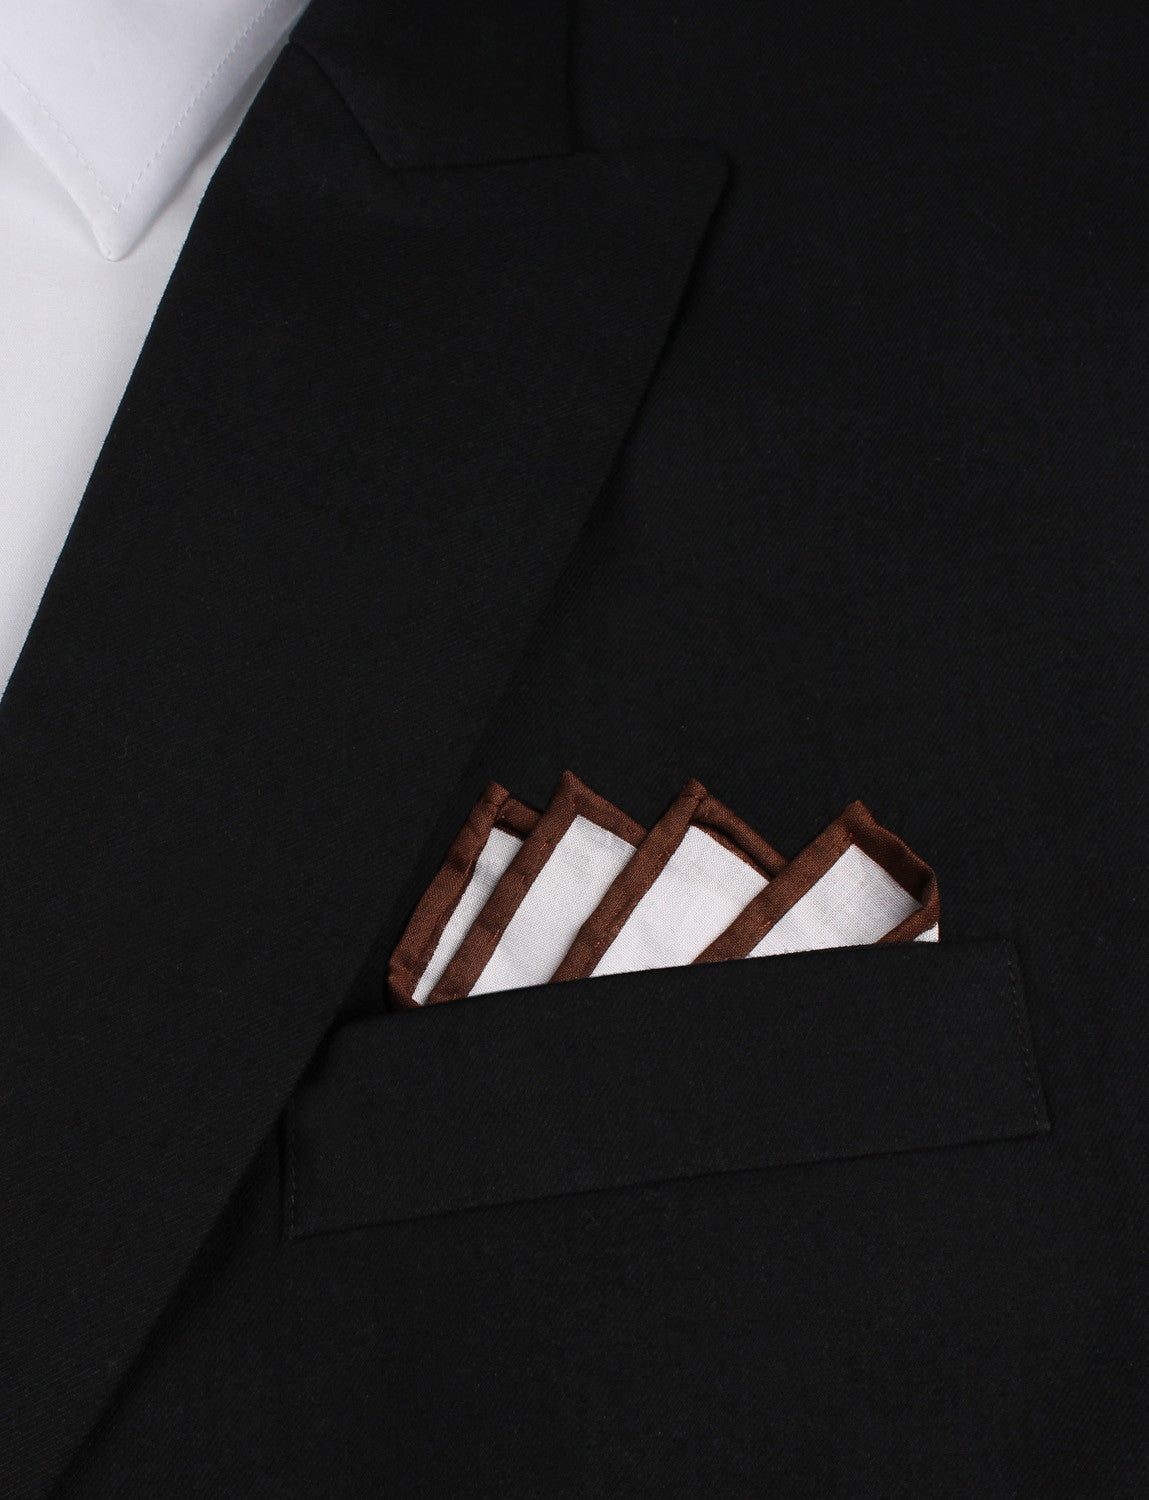 White Cotton Pocket Square with Brown Border Point Fold